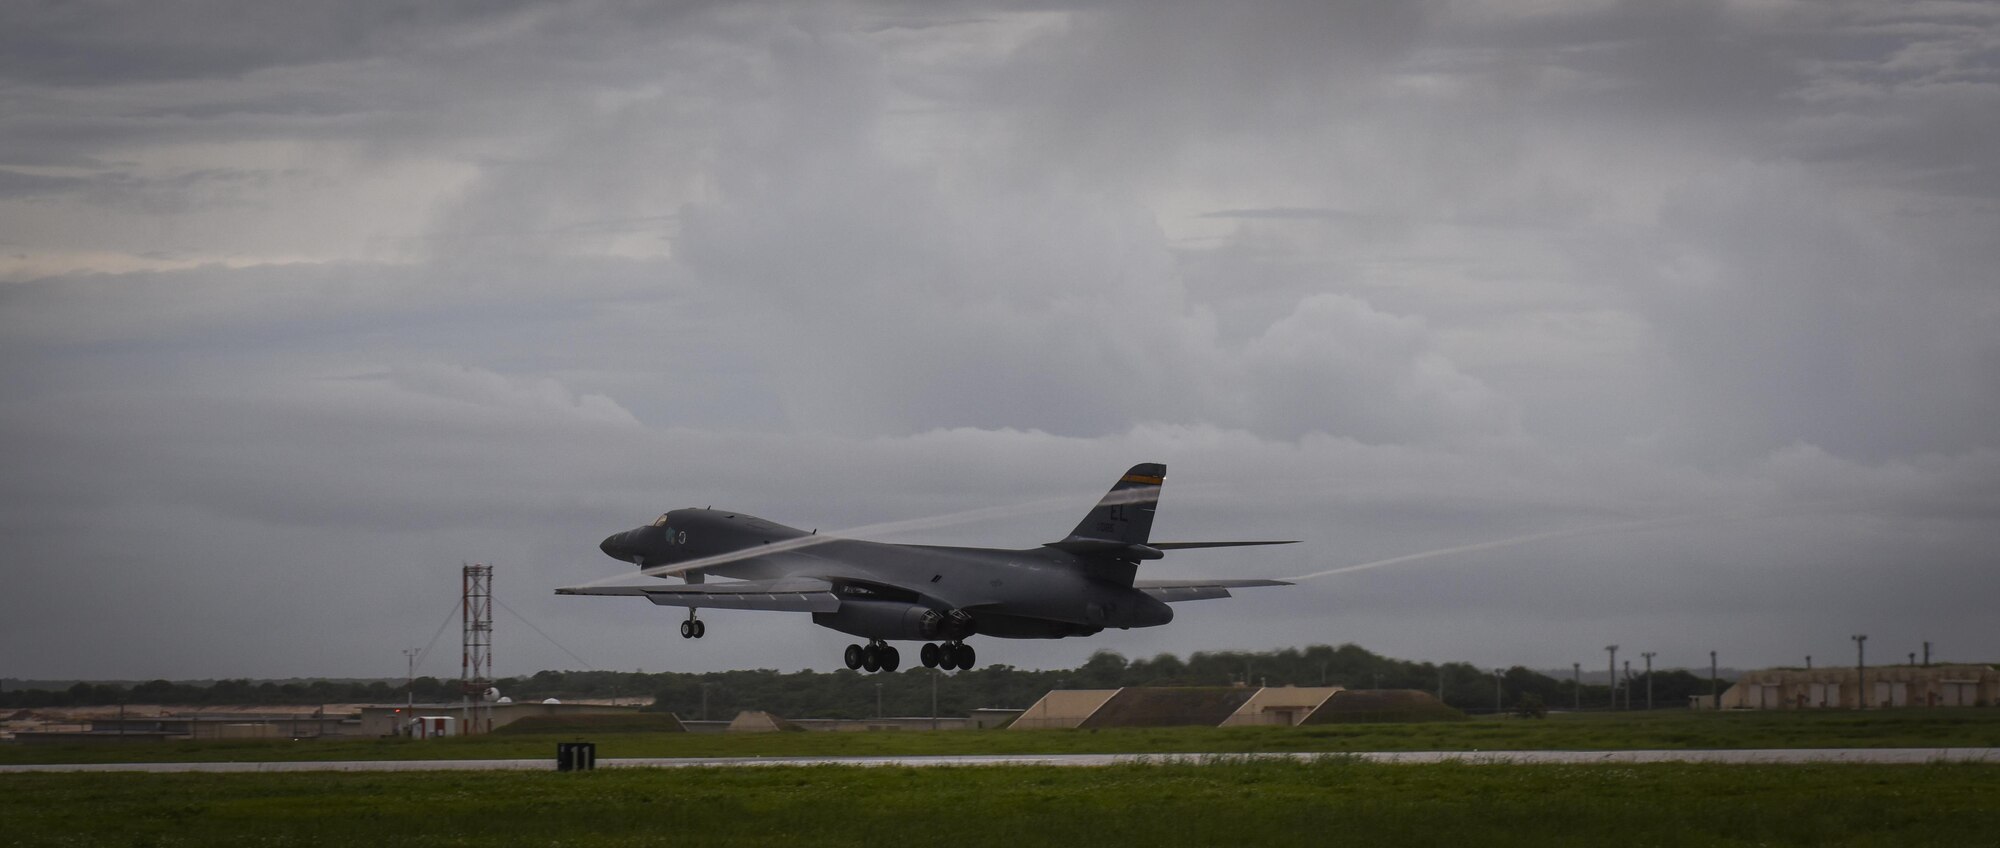 A B-1B Lancer assigned to the 34th Expeditionary Bomb Squadron, deployed from Ellsworth Air Force Base, S.D., lands Aug. 6, 2016, at Andersen AFB, Guam. Incorporating the B-1 into Pacific Command operations, exercises the Air Force’s ability to integrate a unique capability with regional allies and partners in various parts of the world. (U.S. Air Force photo by Tech. Sgt. Richard P. Ebensberger)